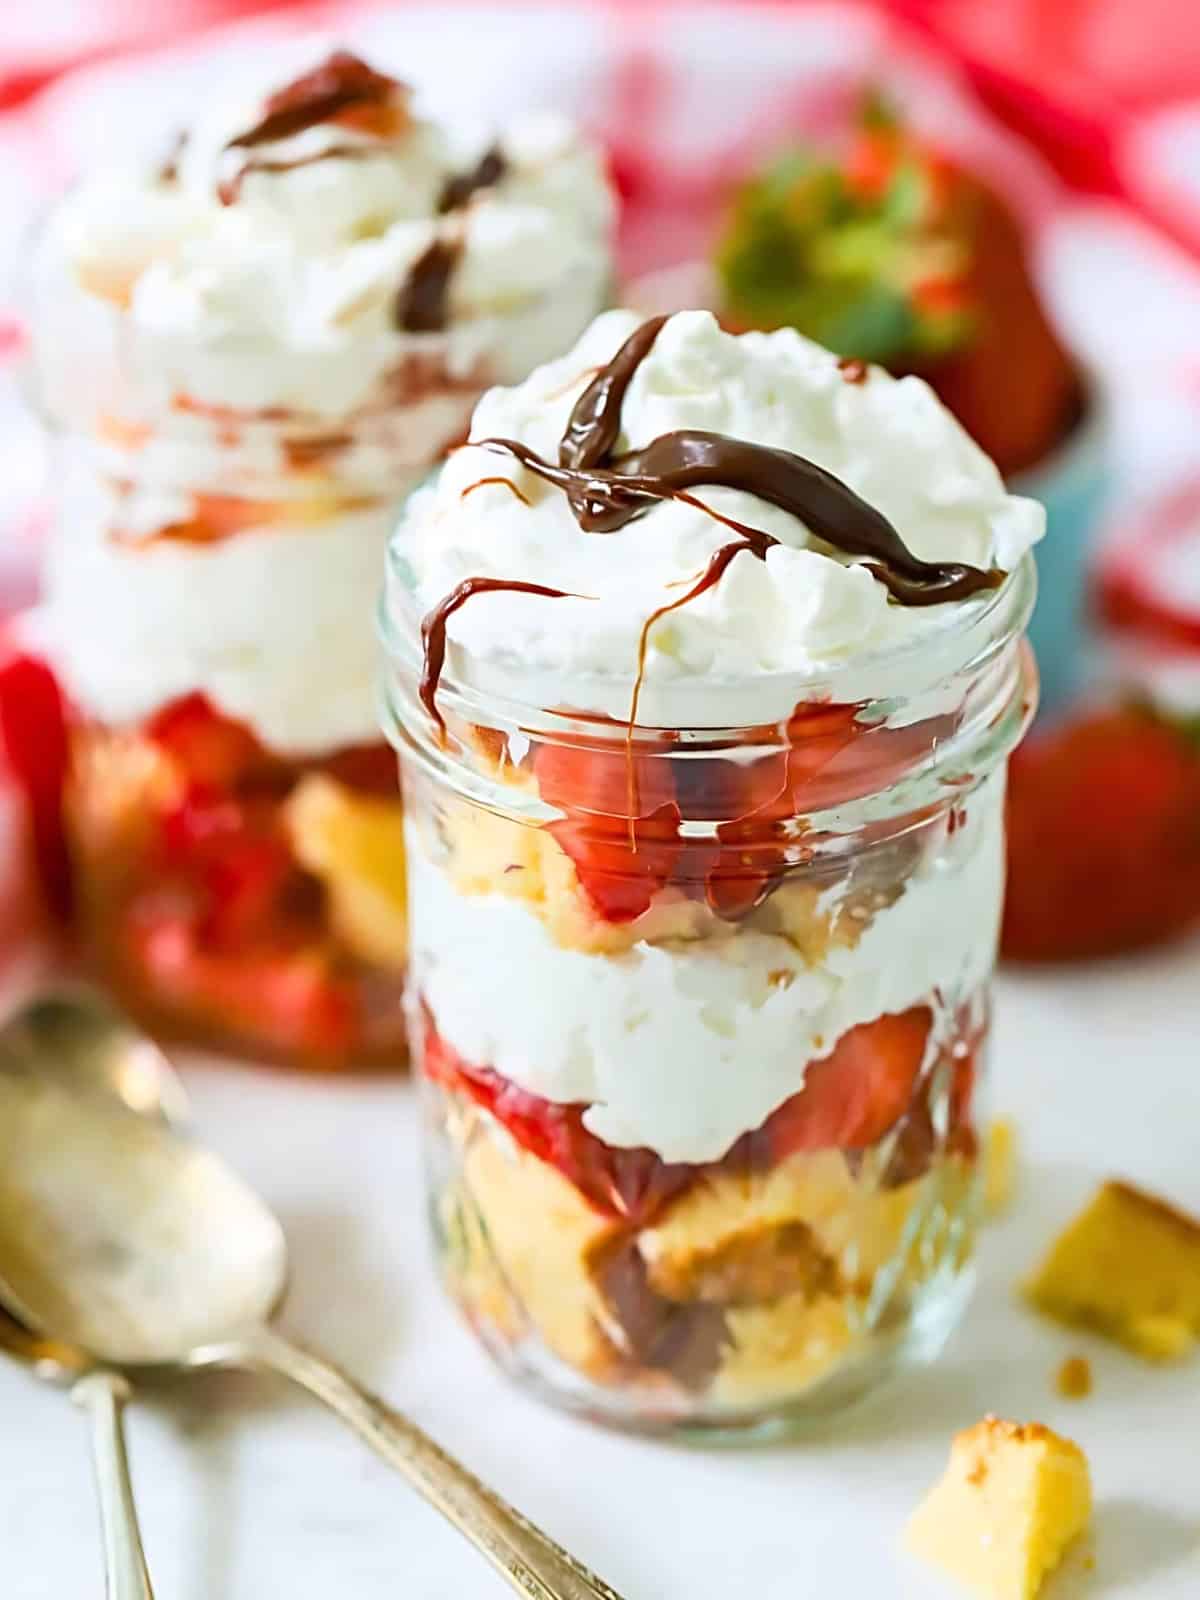 Strawberry shortcakes served in a glass jar, topped with whipped cream and drizzled with chocolate syrup.